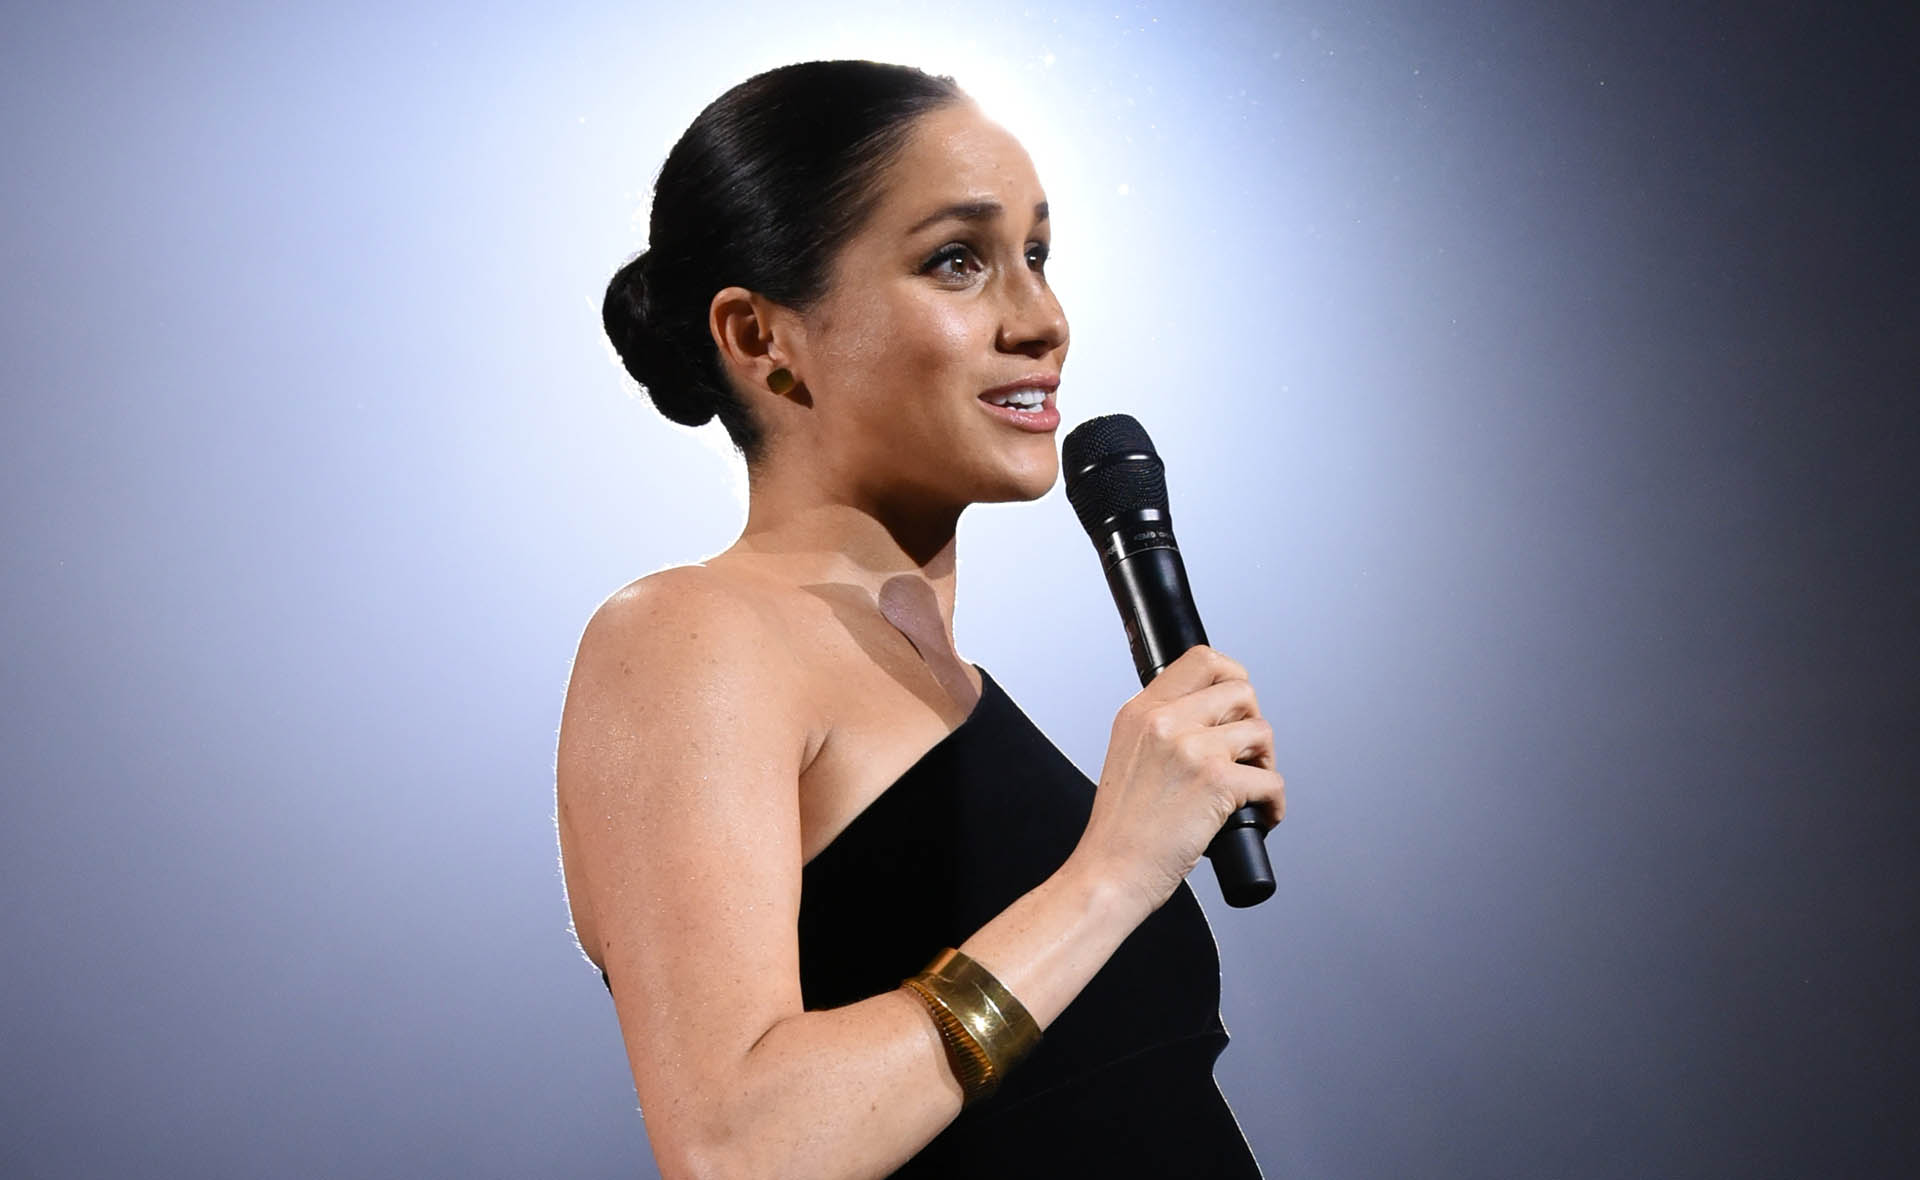 Meghan Markle just won another legal victory after a former staffer’s bombshells about her and Prince Harry in court